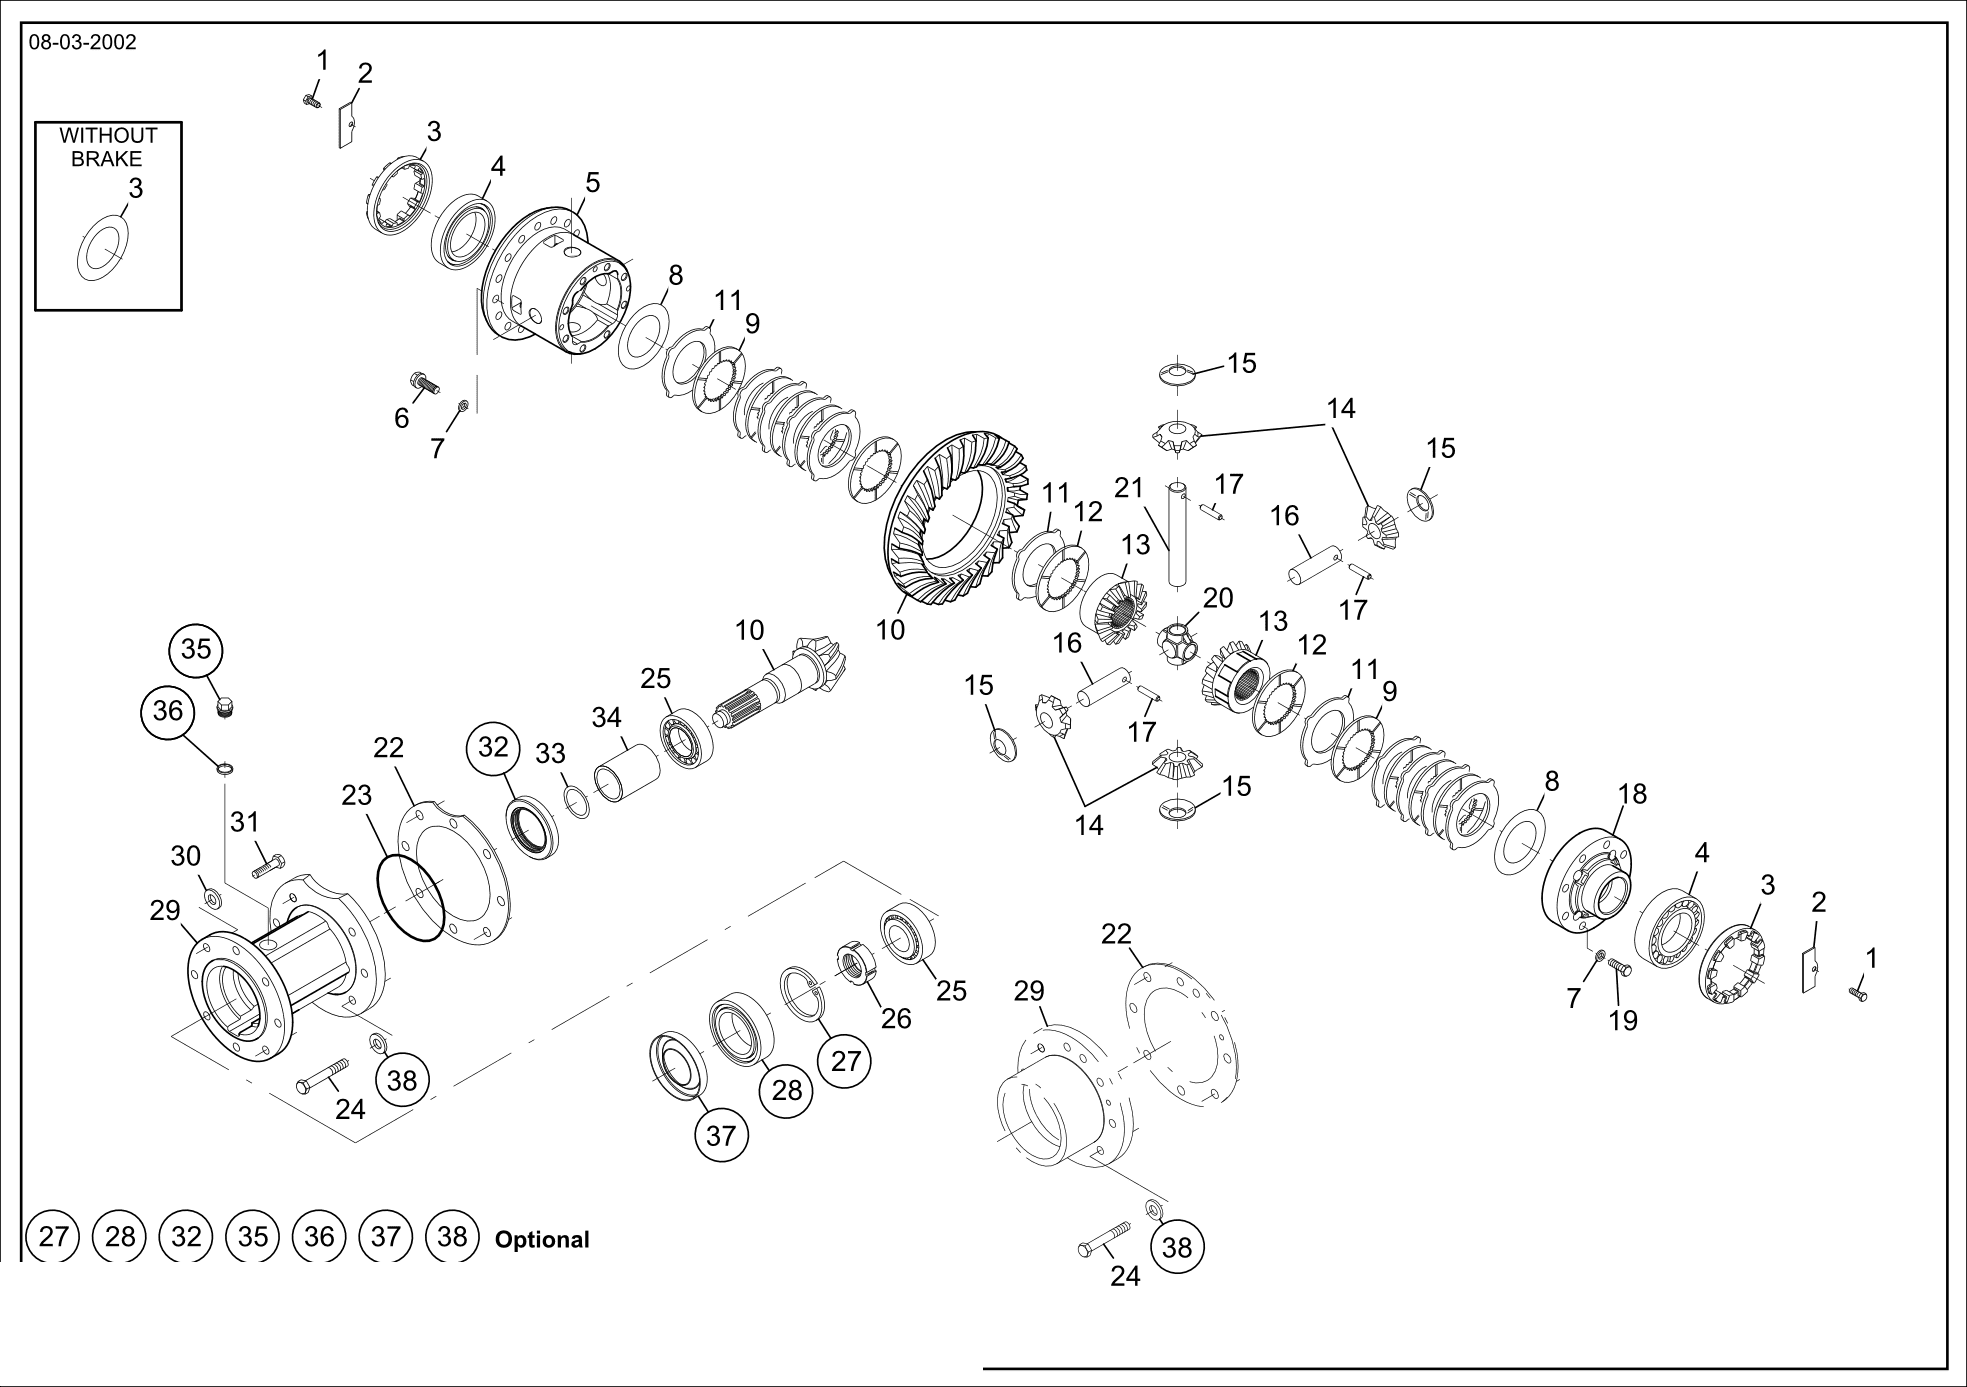 drawing for BRODERSON MANUFACTURING 0-055-00194 - DISC (figure 3)